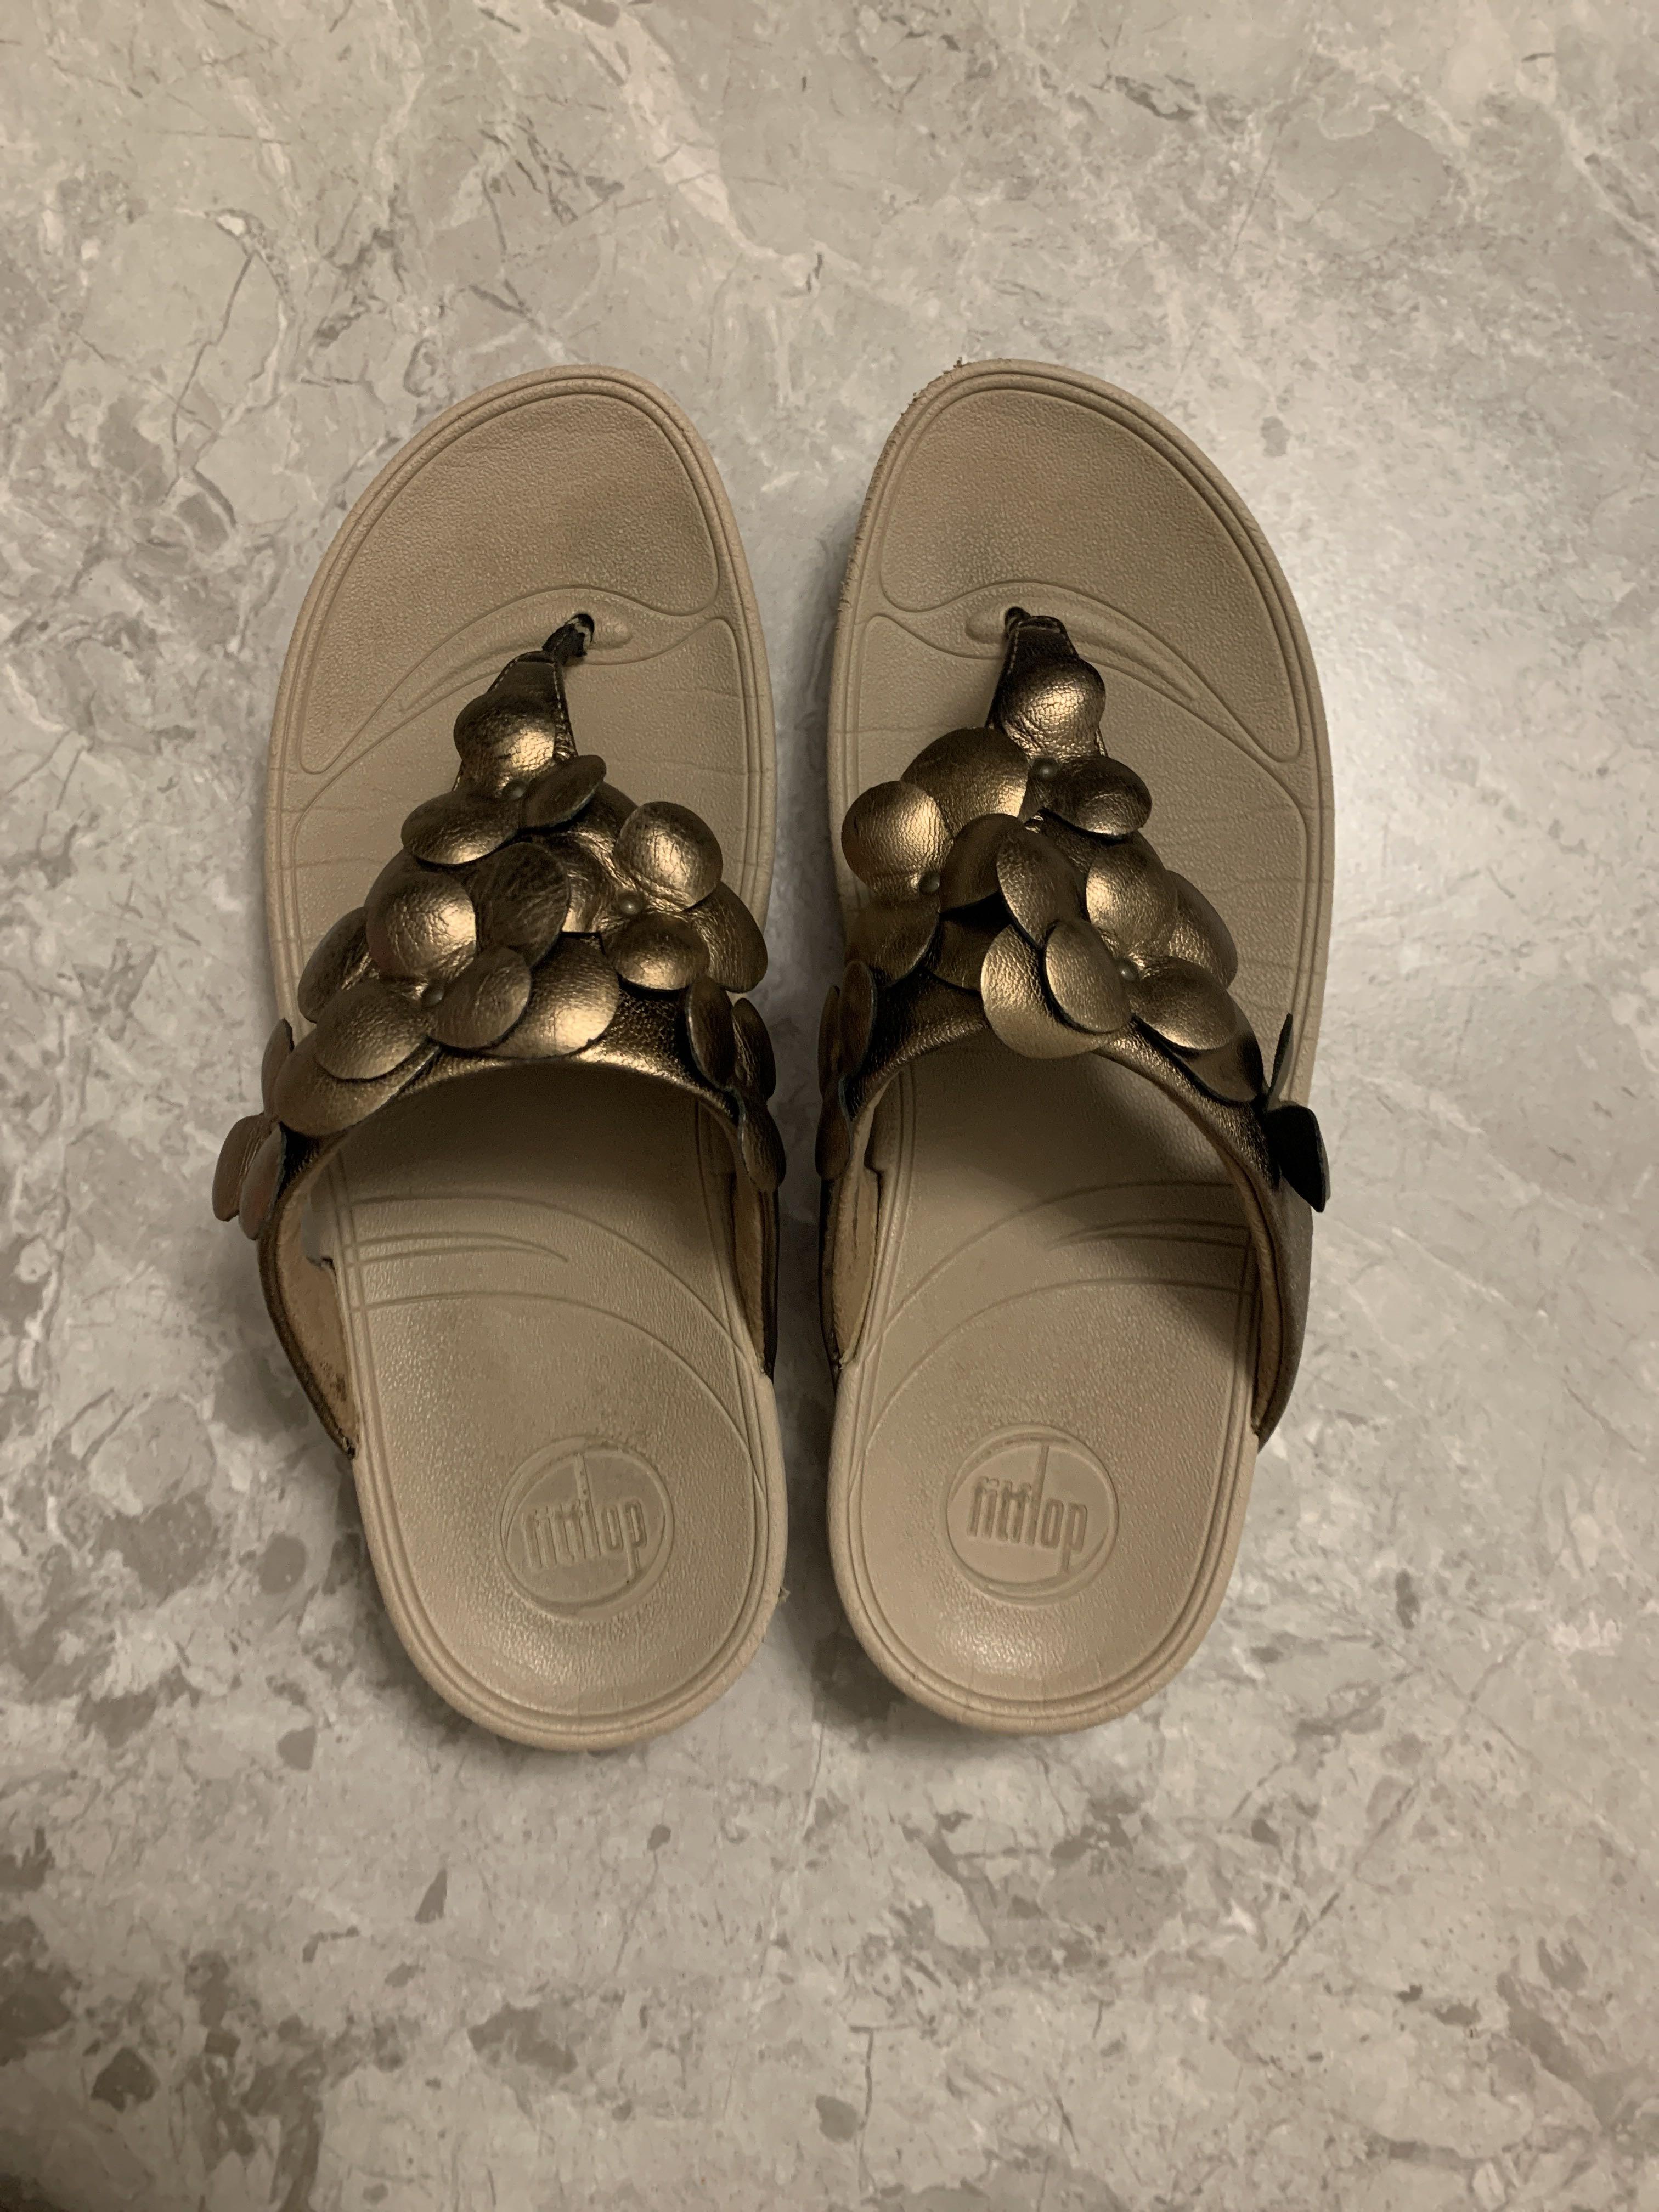 fitflop 38